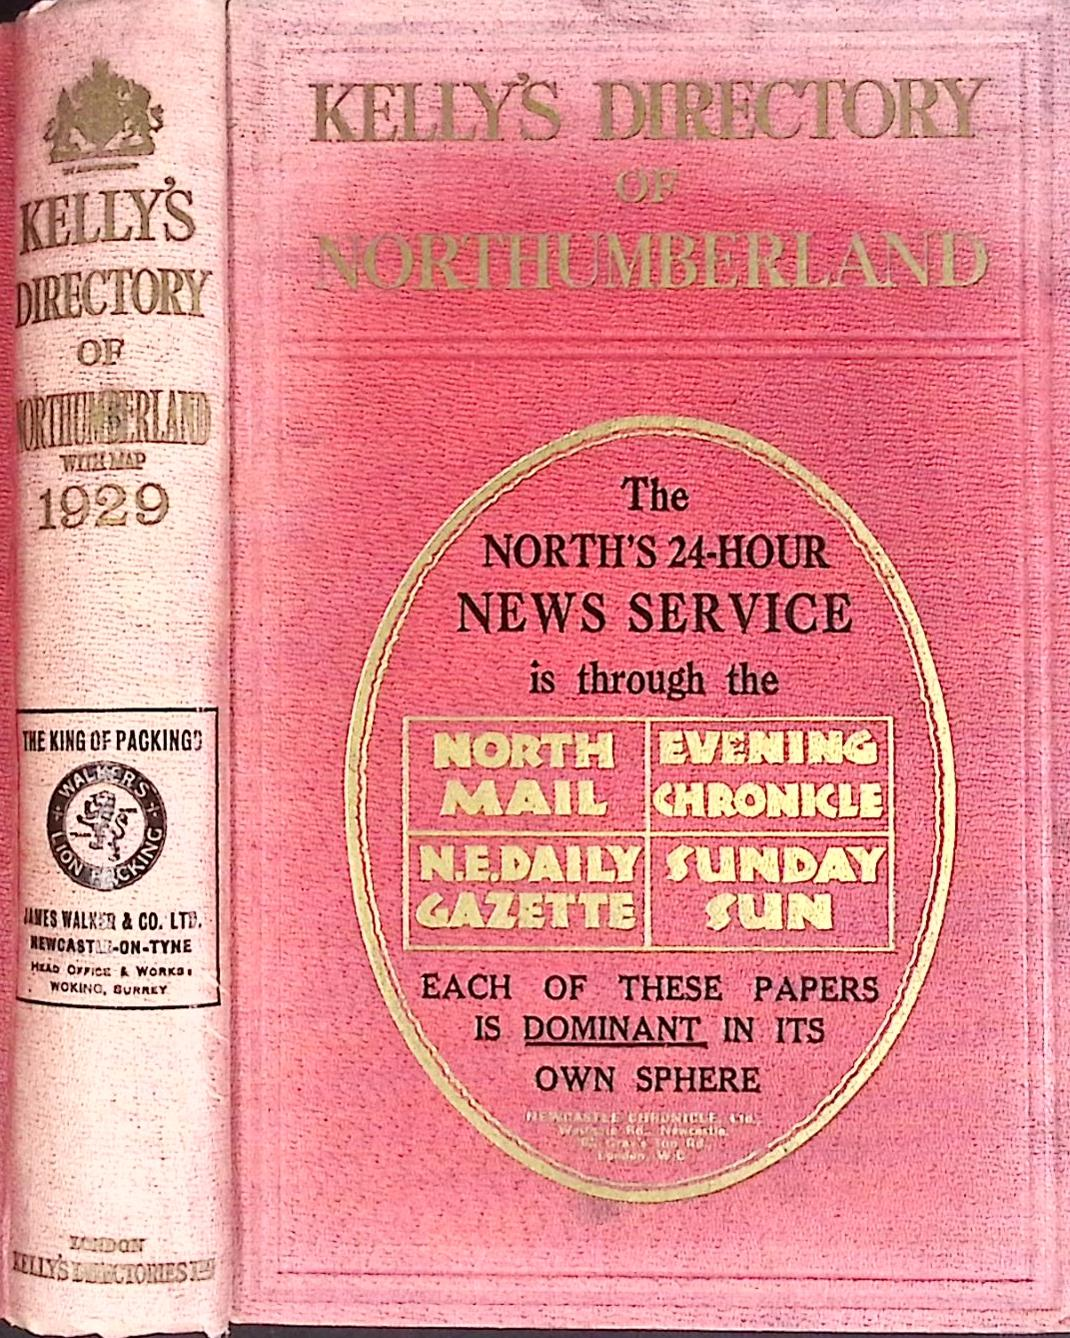 Kelly's Directory of Northumberland. 1929.